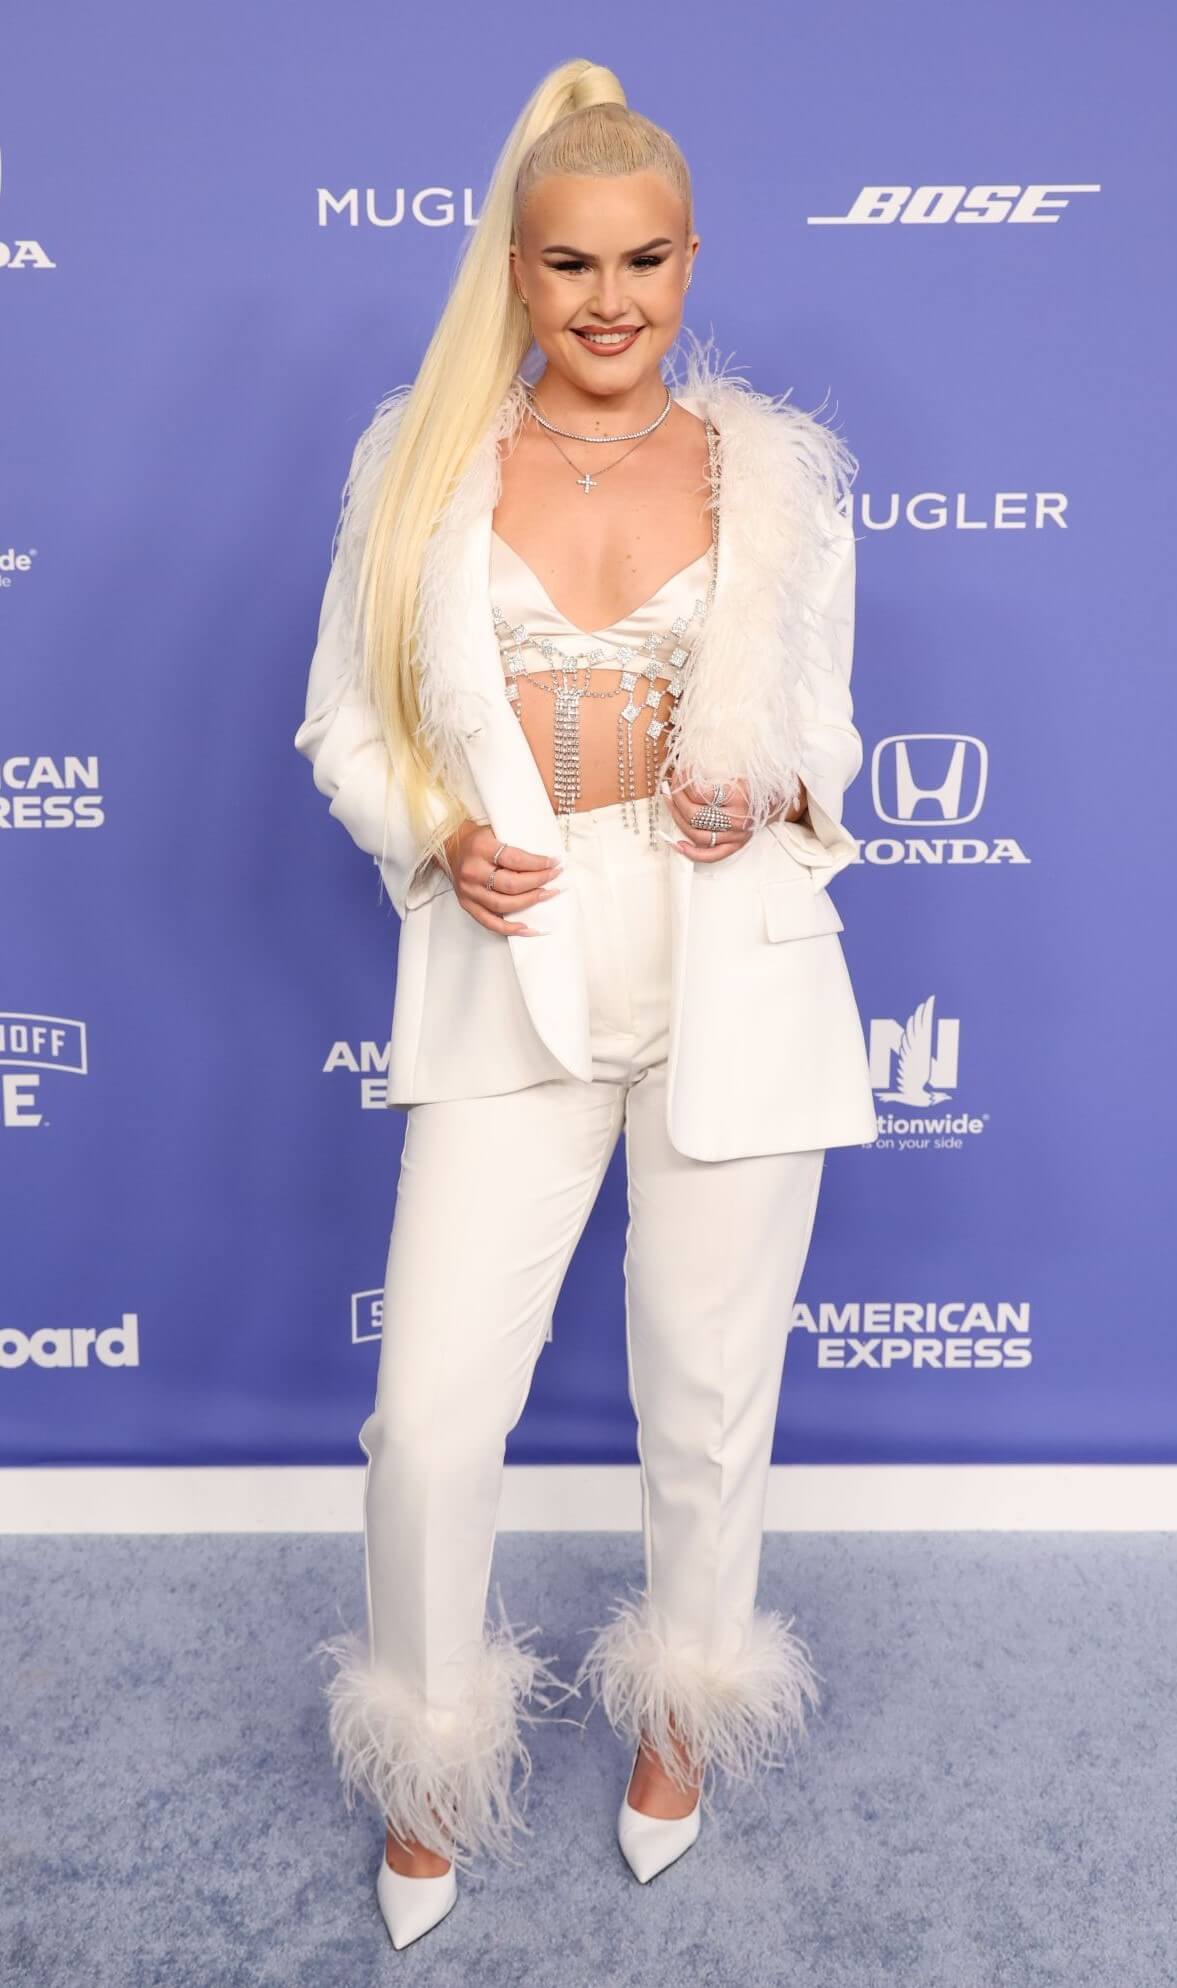 Ashlee Keating In White Fur Coat & Pants With Bralette Outfits At Billboard Women in Music Awards in Los Angeles